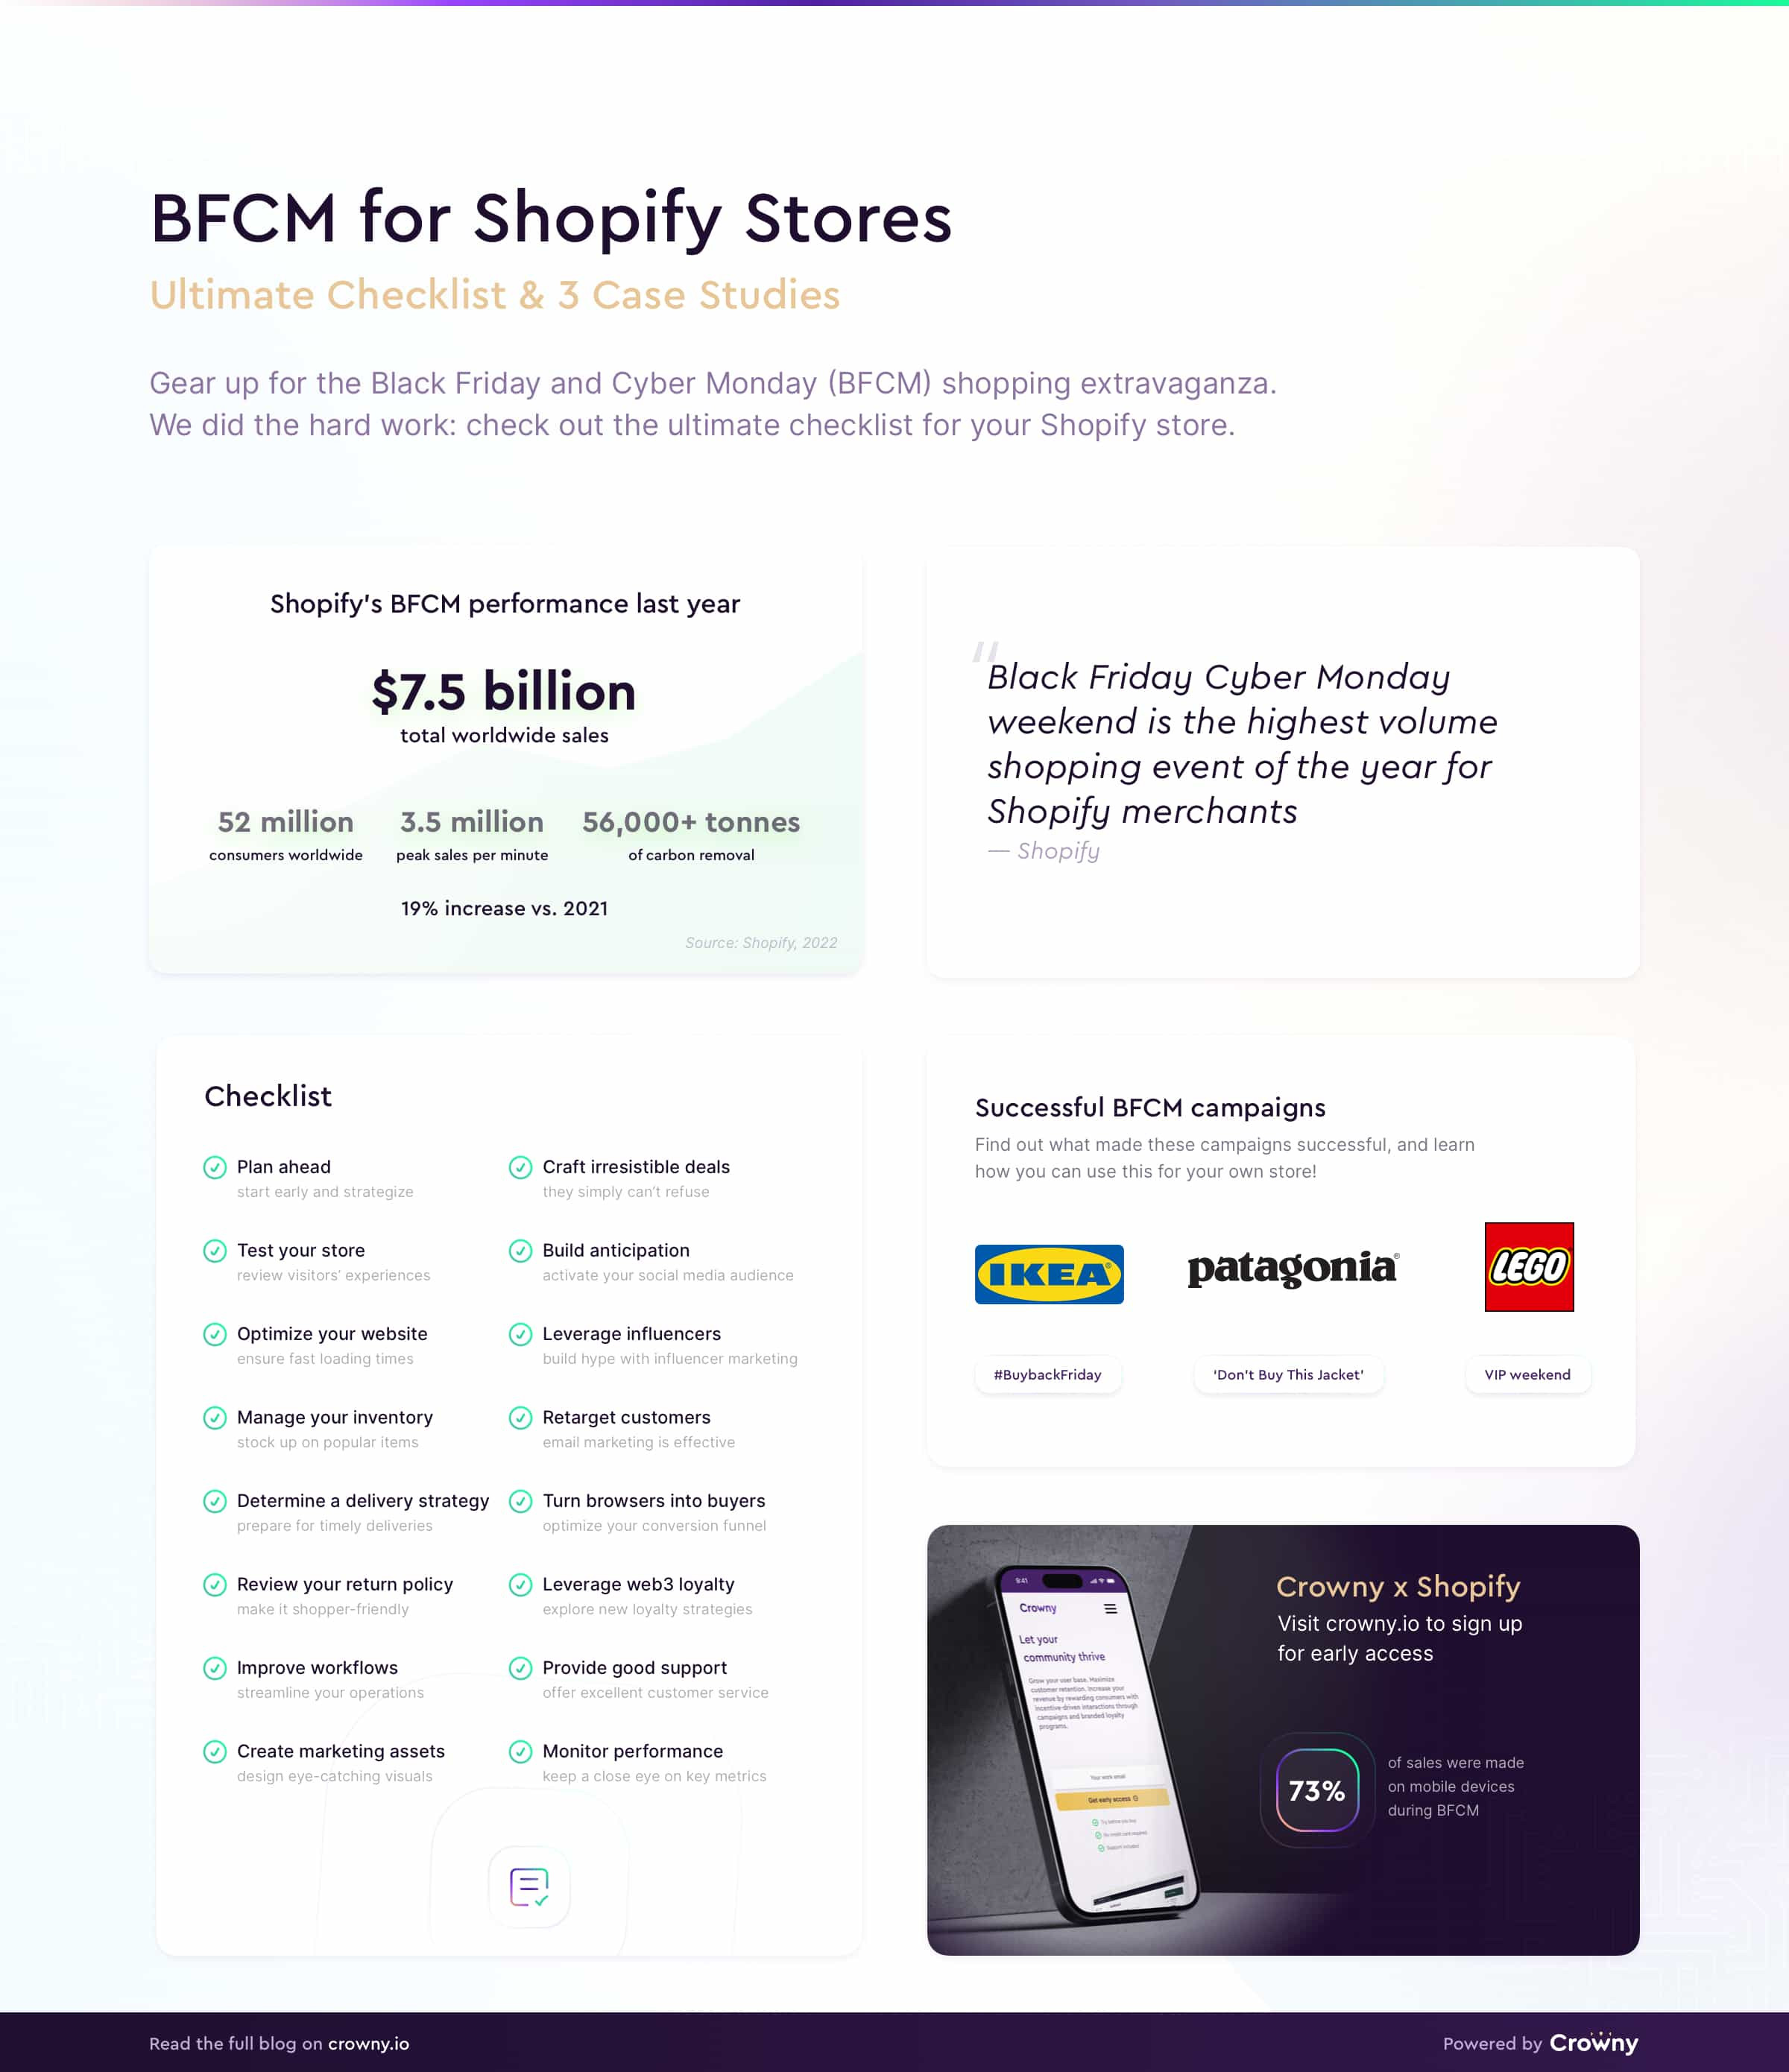 BFCM for Shopify Stores infographic